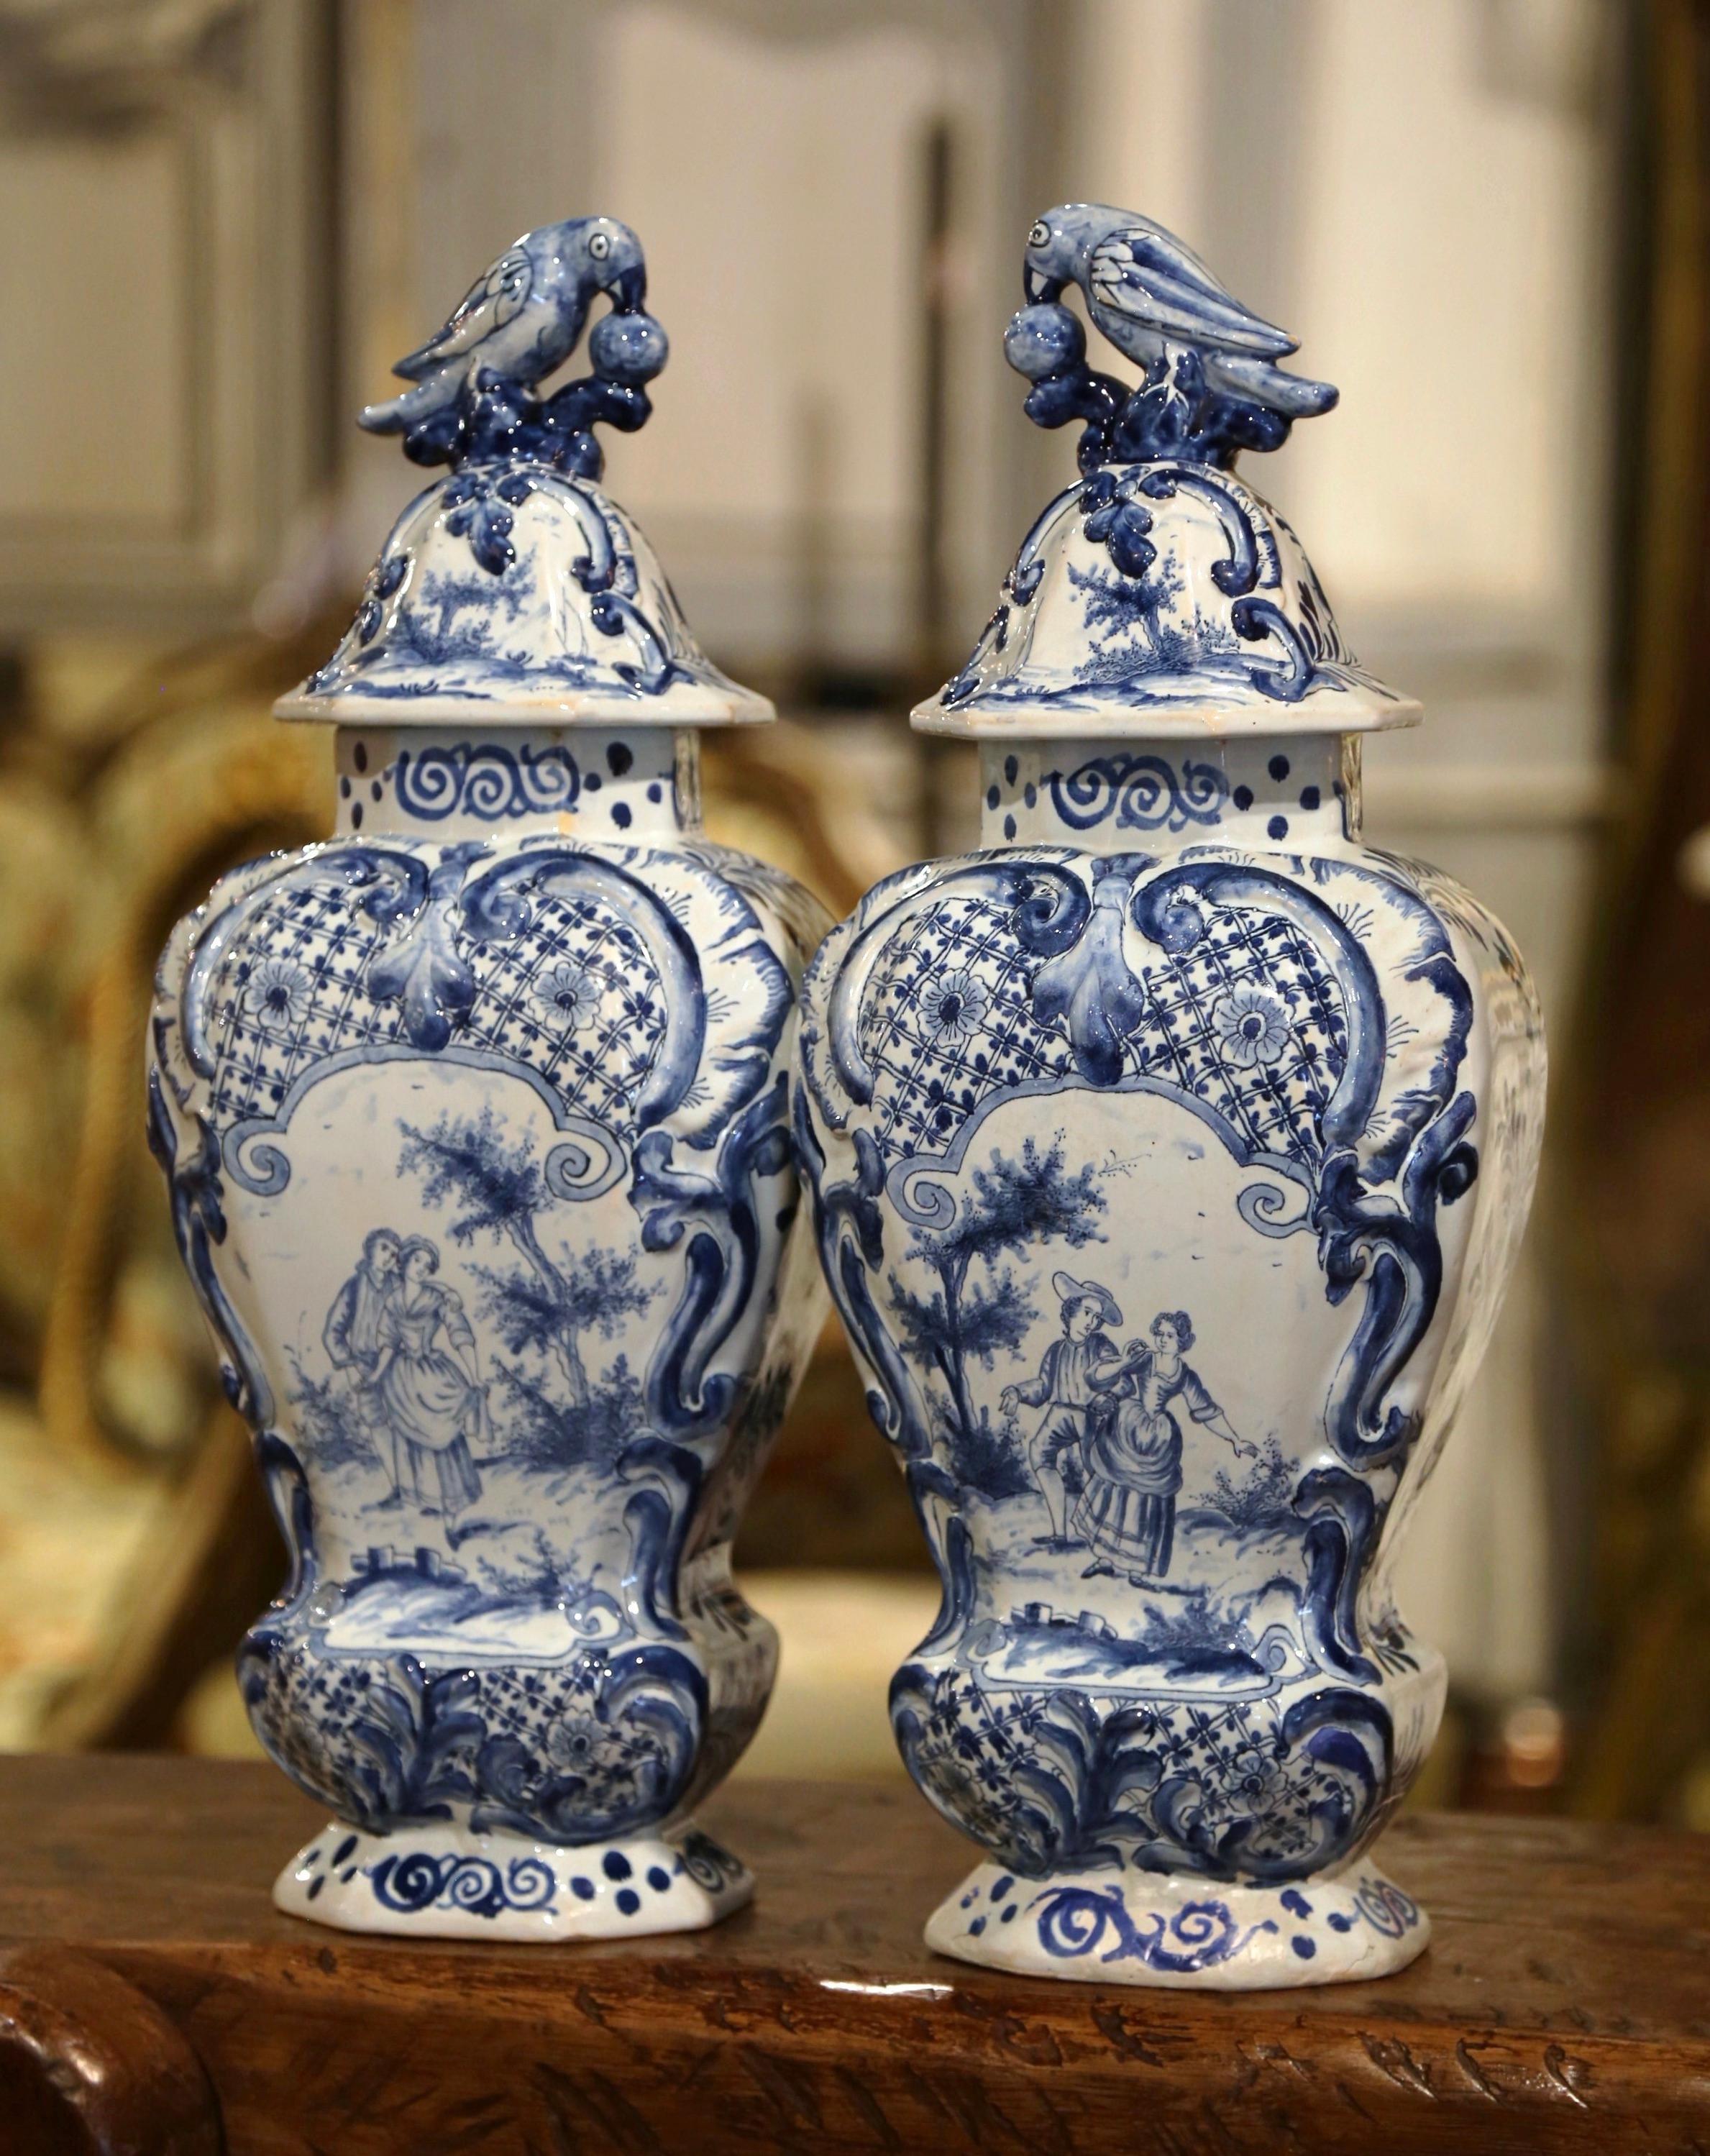 These Classic antique Delft vases were created in France, circa 1860. Each elegant porcelain jar is decorated with finely painted, romantic scene medallions and embellished with floral decor in high relief. Each lid is embellished with a sculpted